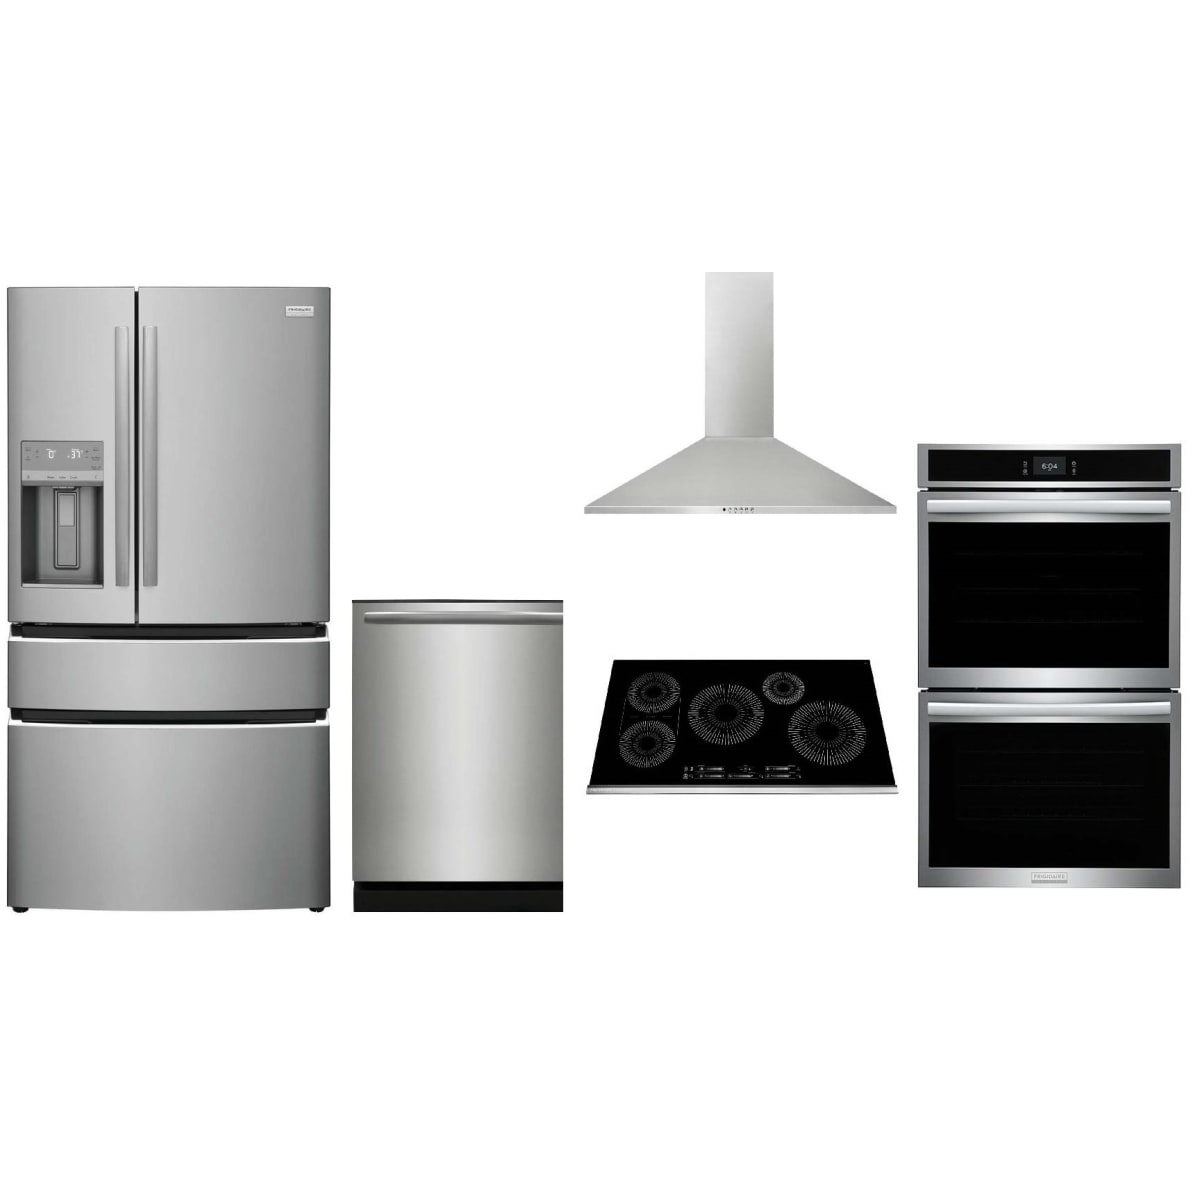 https://s3.img-b.com/image/private/t_base,c_lpad,f_auto,dpr_auto,w_1200,h_1200/product/frigidaire/frigidaire-gallery-5piece-induction-double-6809198.jpg